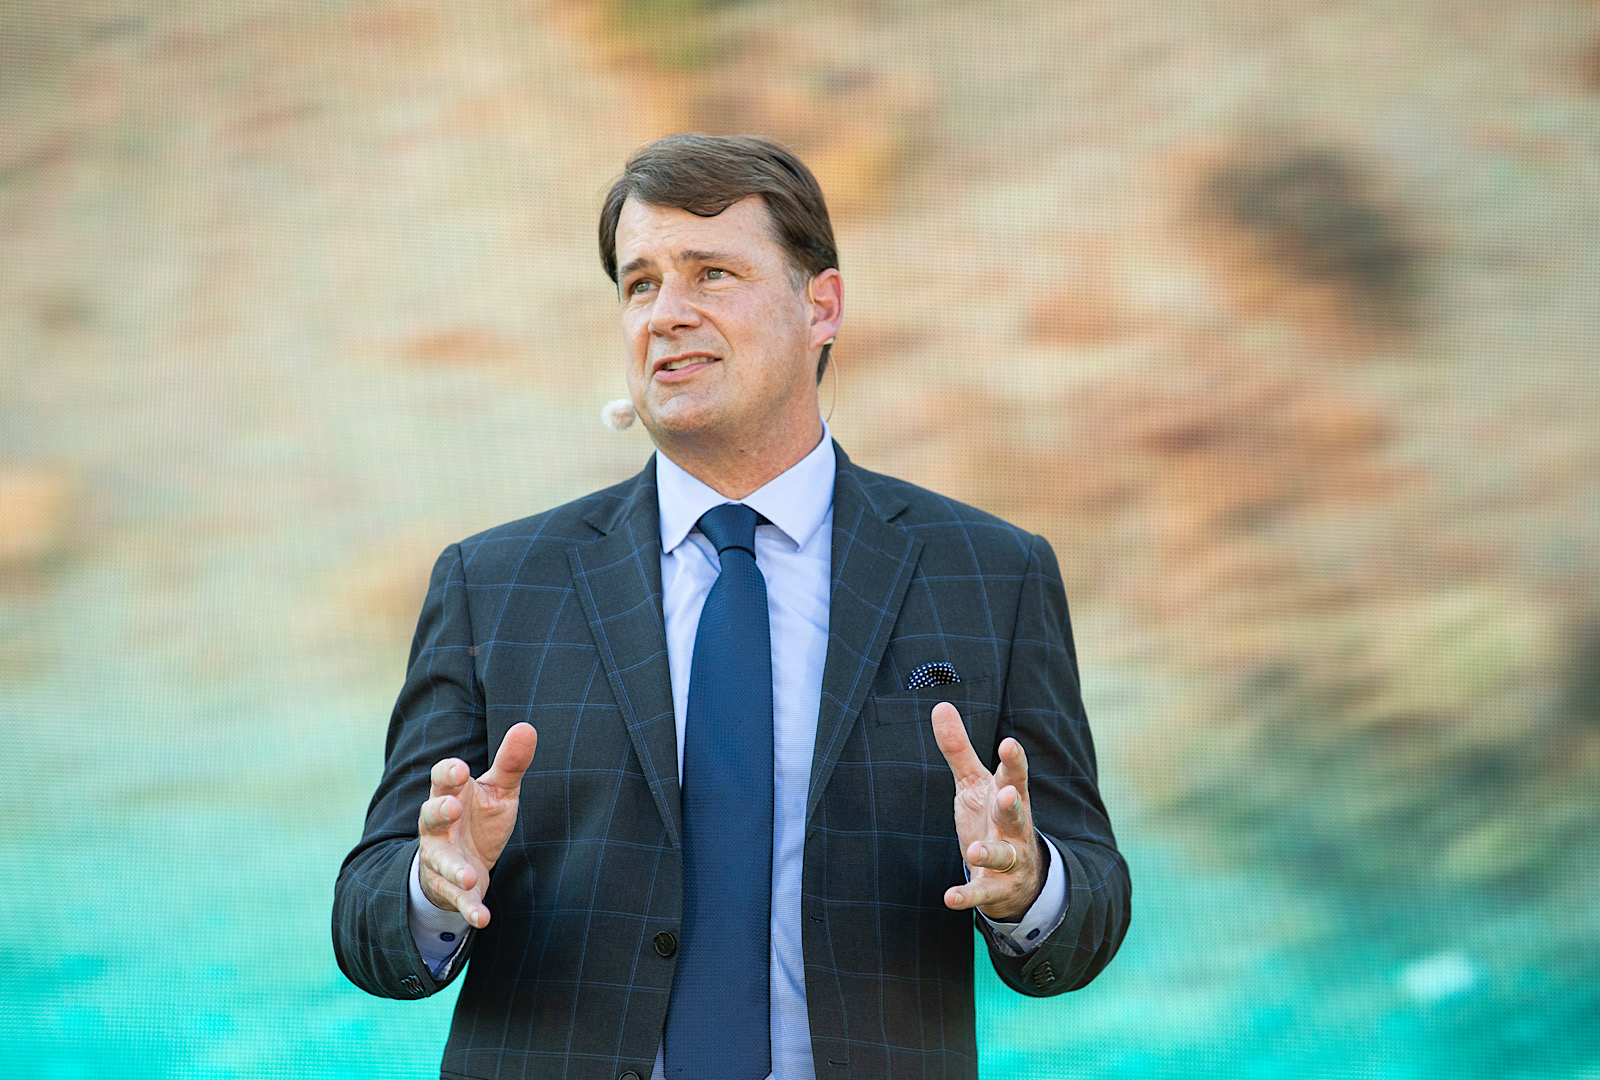 Tom Brady Taught Ford CEO Jim Farley How To Be a Higher Chief